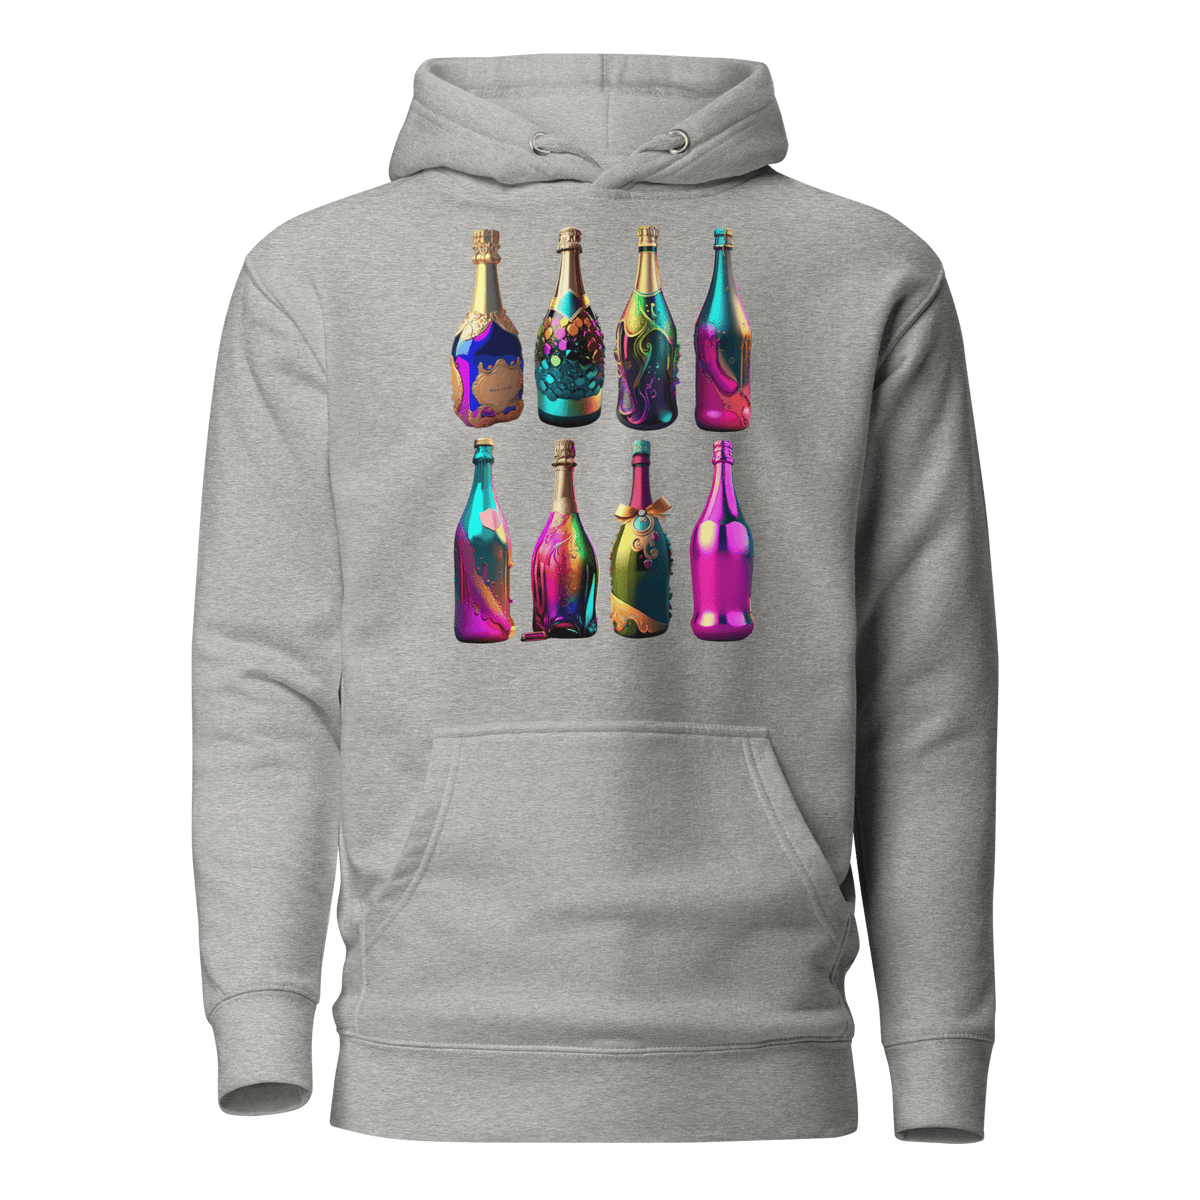 Carbon Grey- yes way rose shirt, liquor t-shirt, gift for mom, gift for him, gift for her, gift for champagne lovers, drinking tee, champagne sweatshirt, champagne shirt, champagne problems sweatshirt, champagne lovers, champagne bottles tee, alcohol tee, hoodie, champagne bottles hoodie